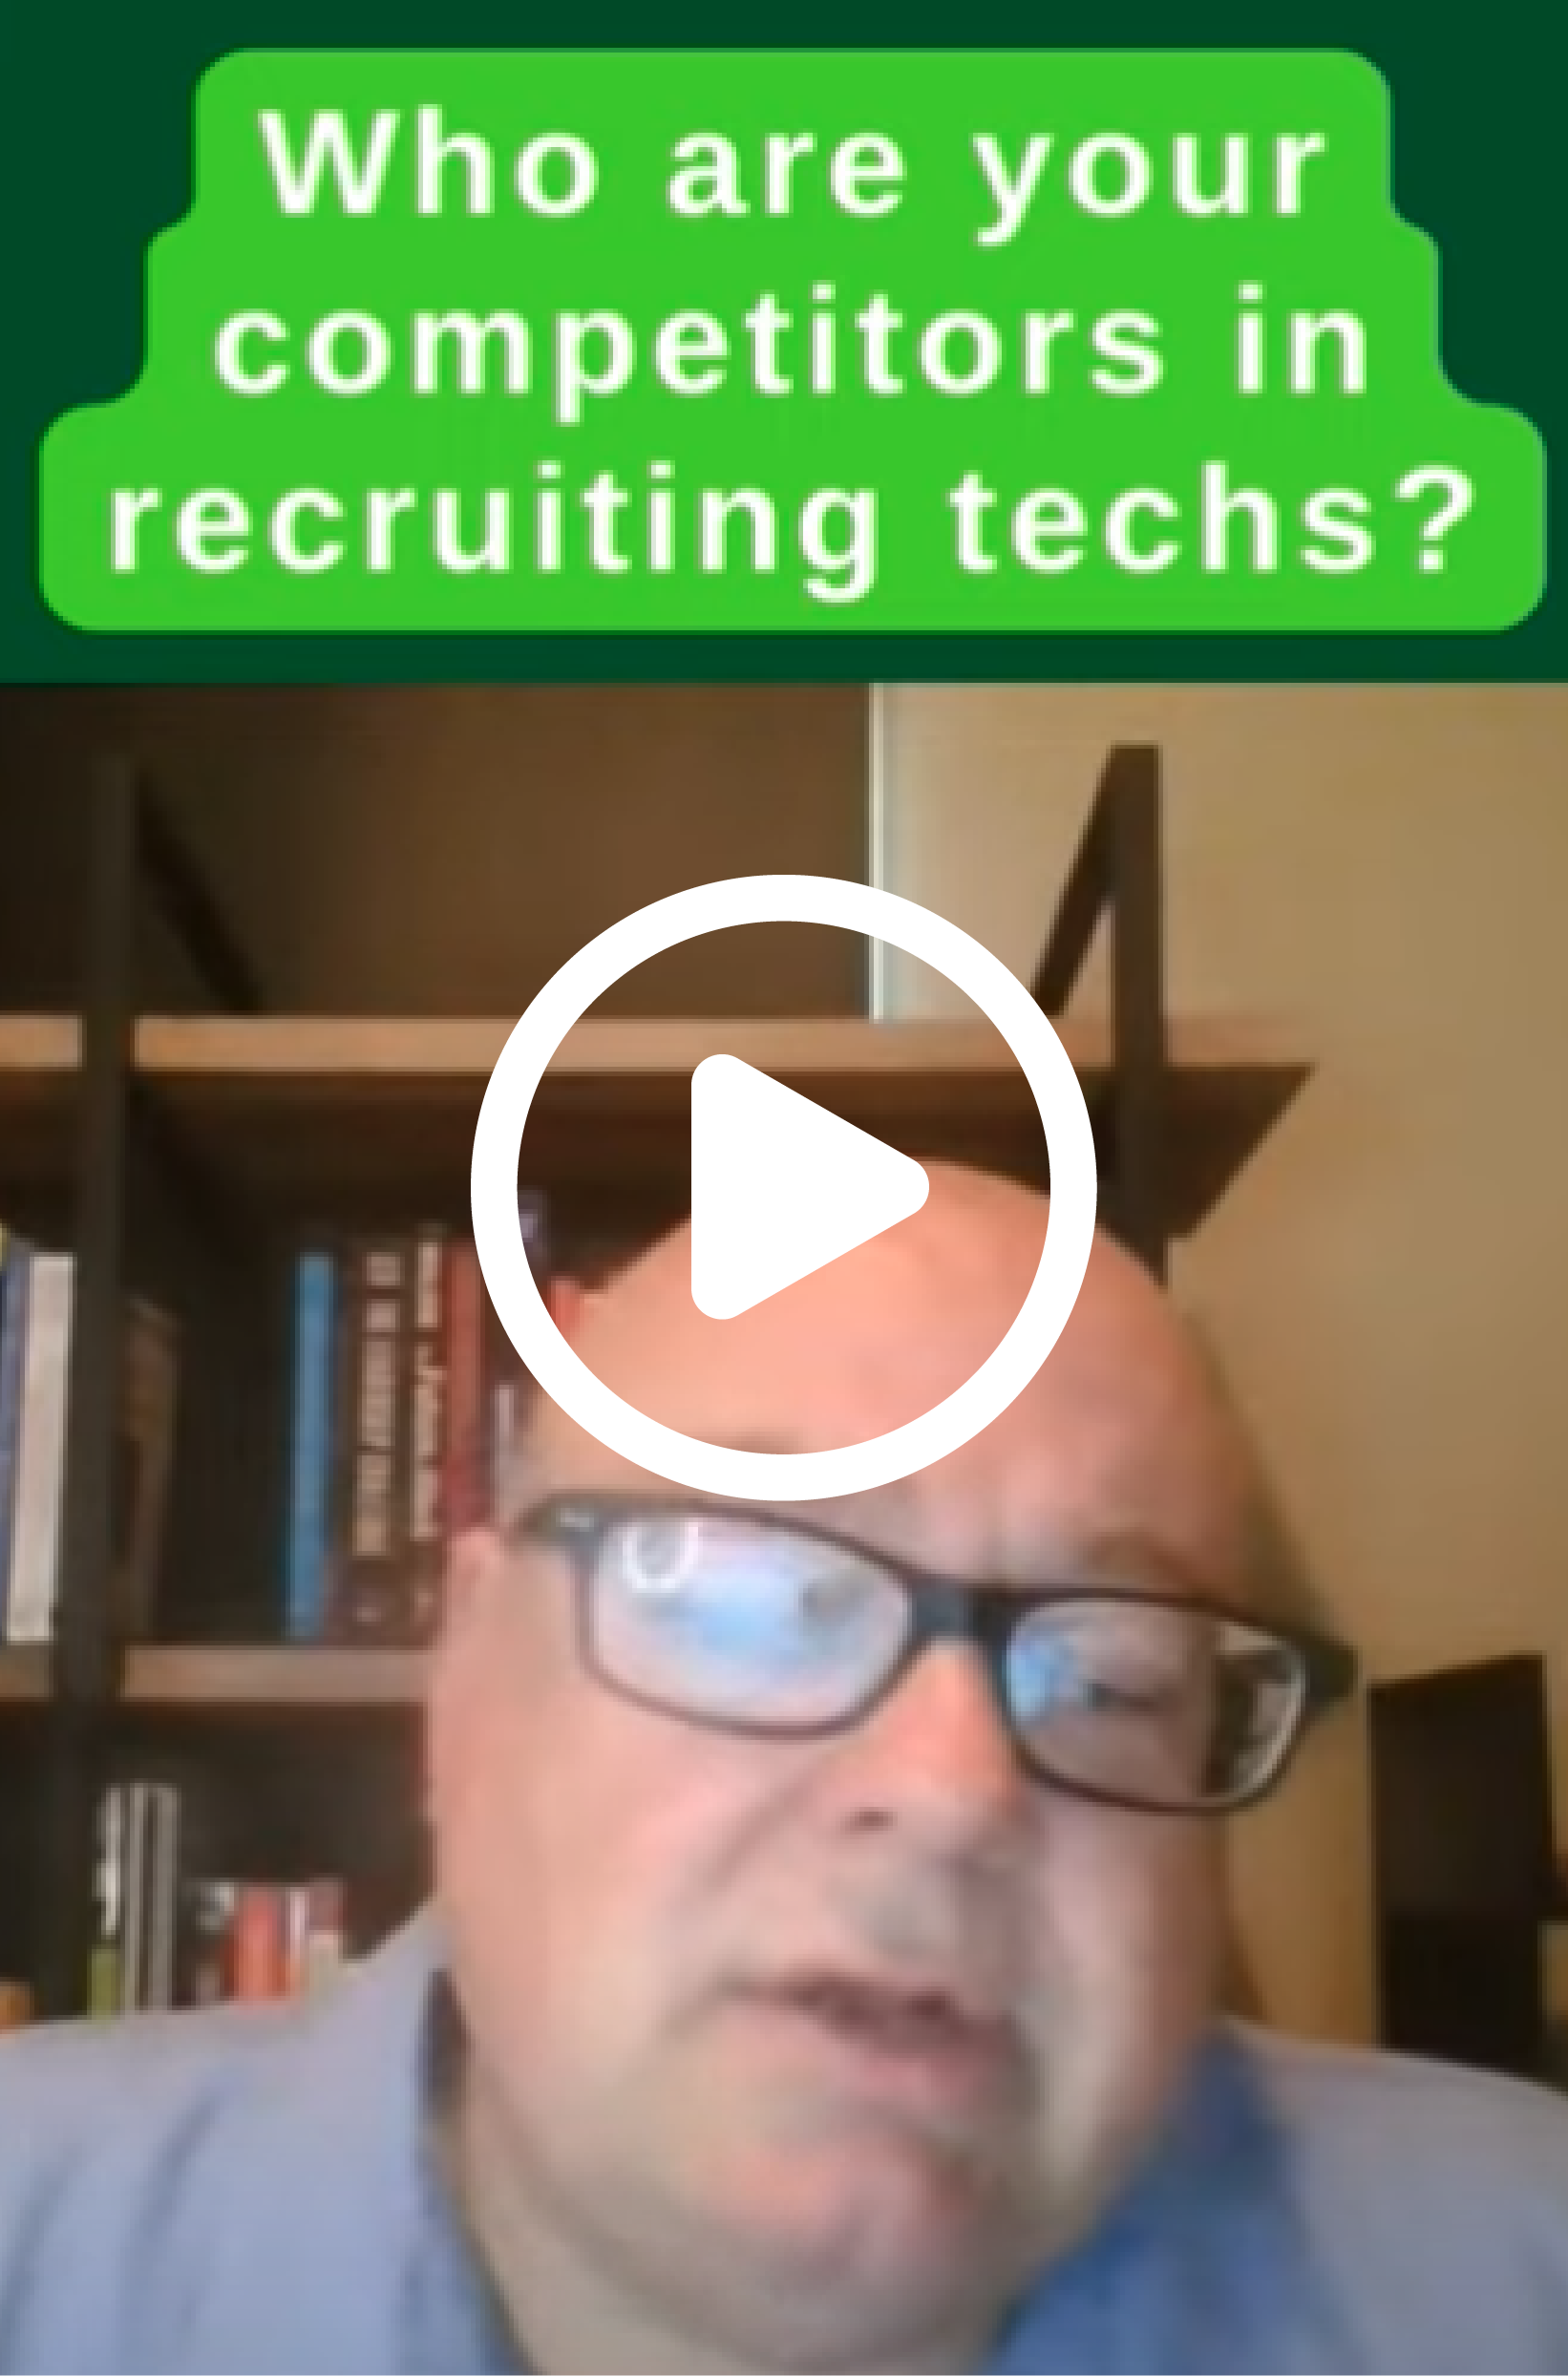 Play Video: Who Are your competitors in recruiting techs